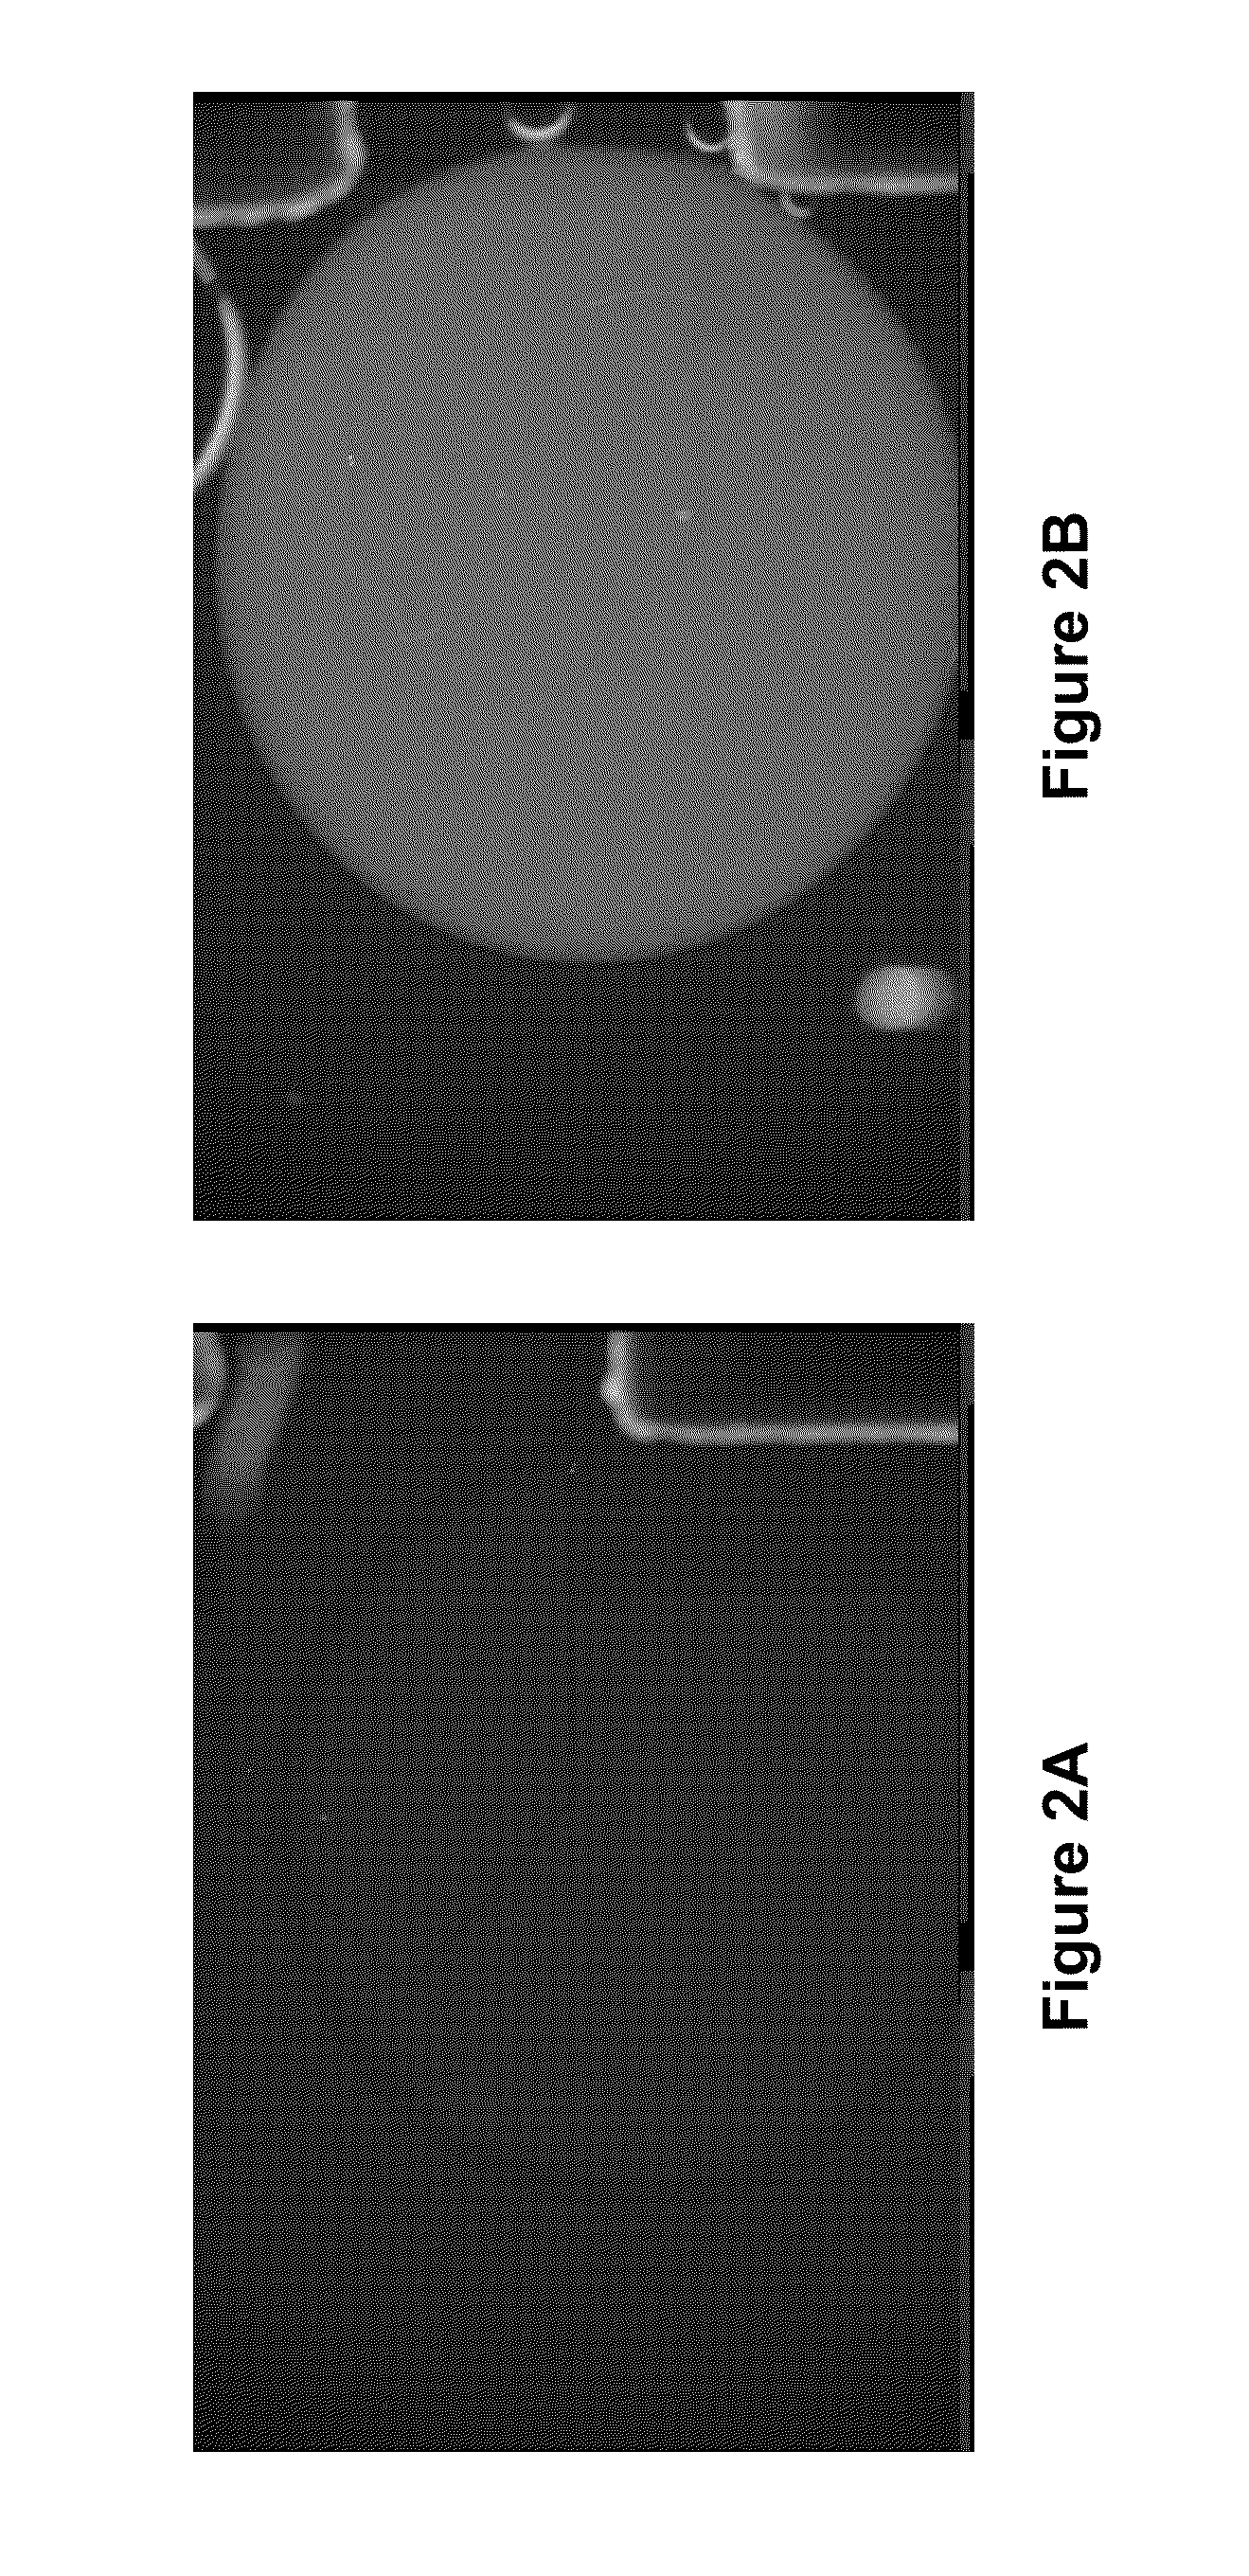 Method of conducting a droplet based enzymatic assay